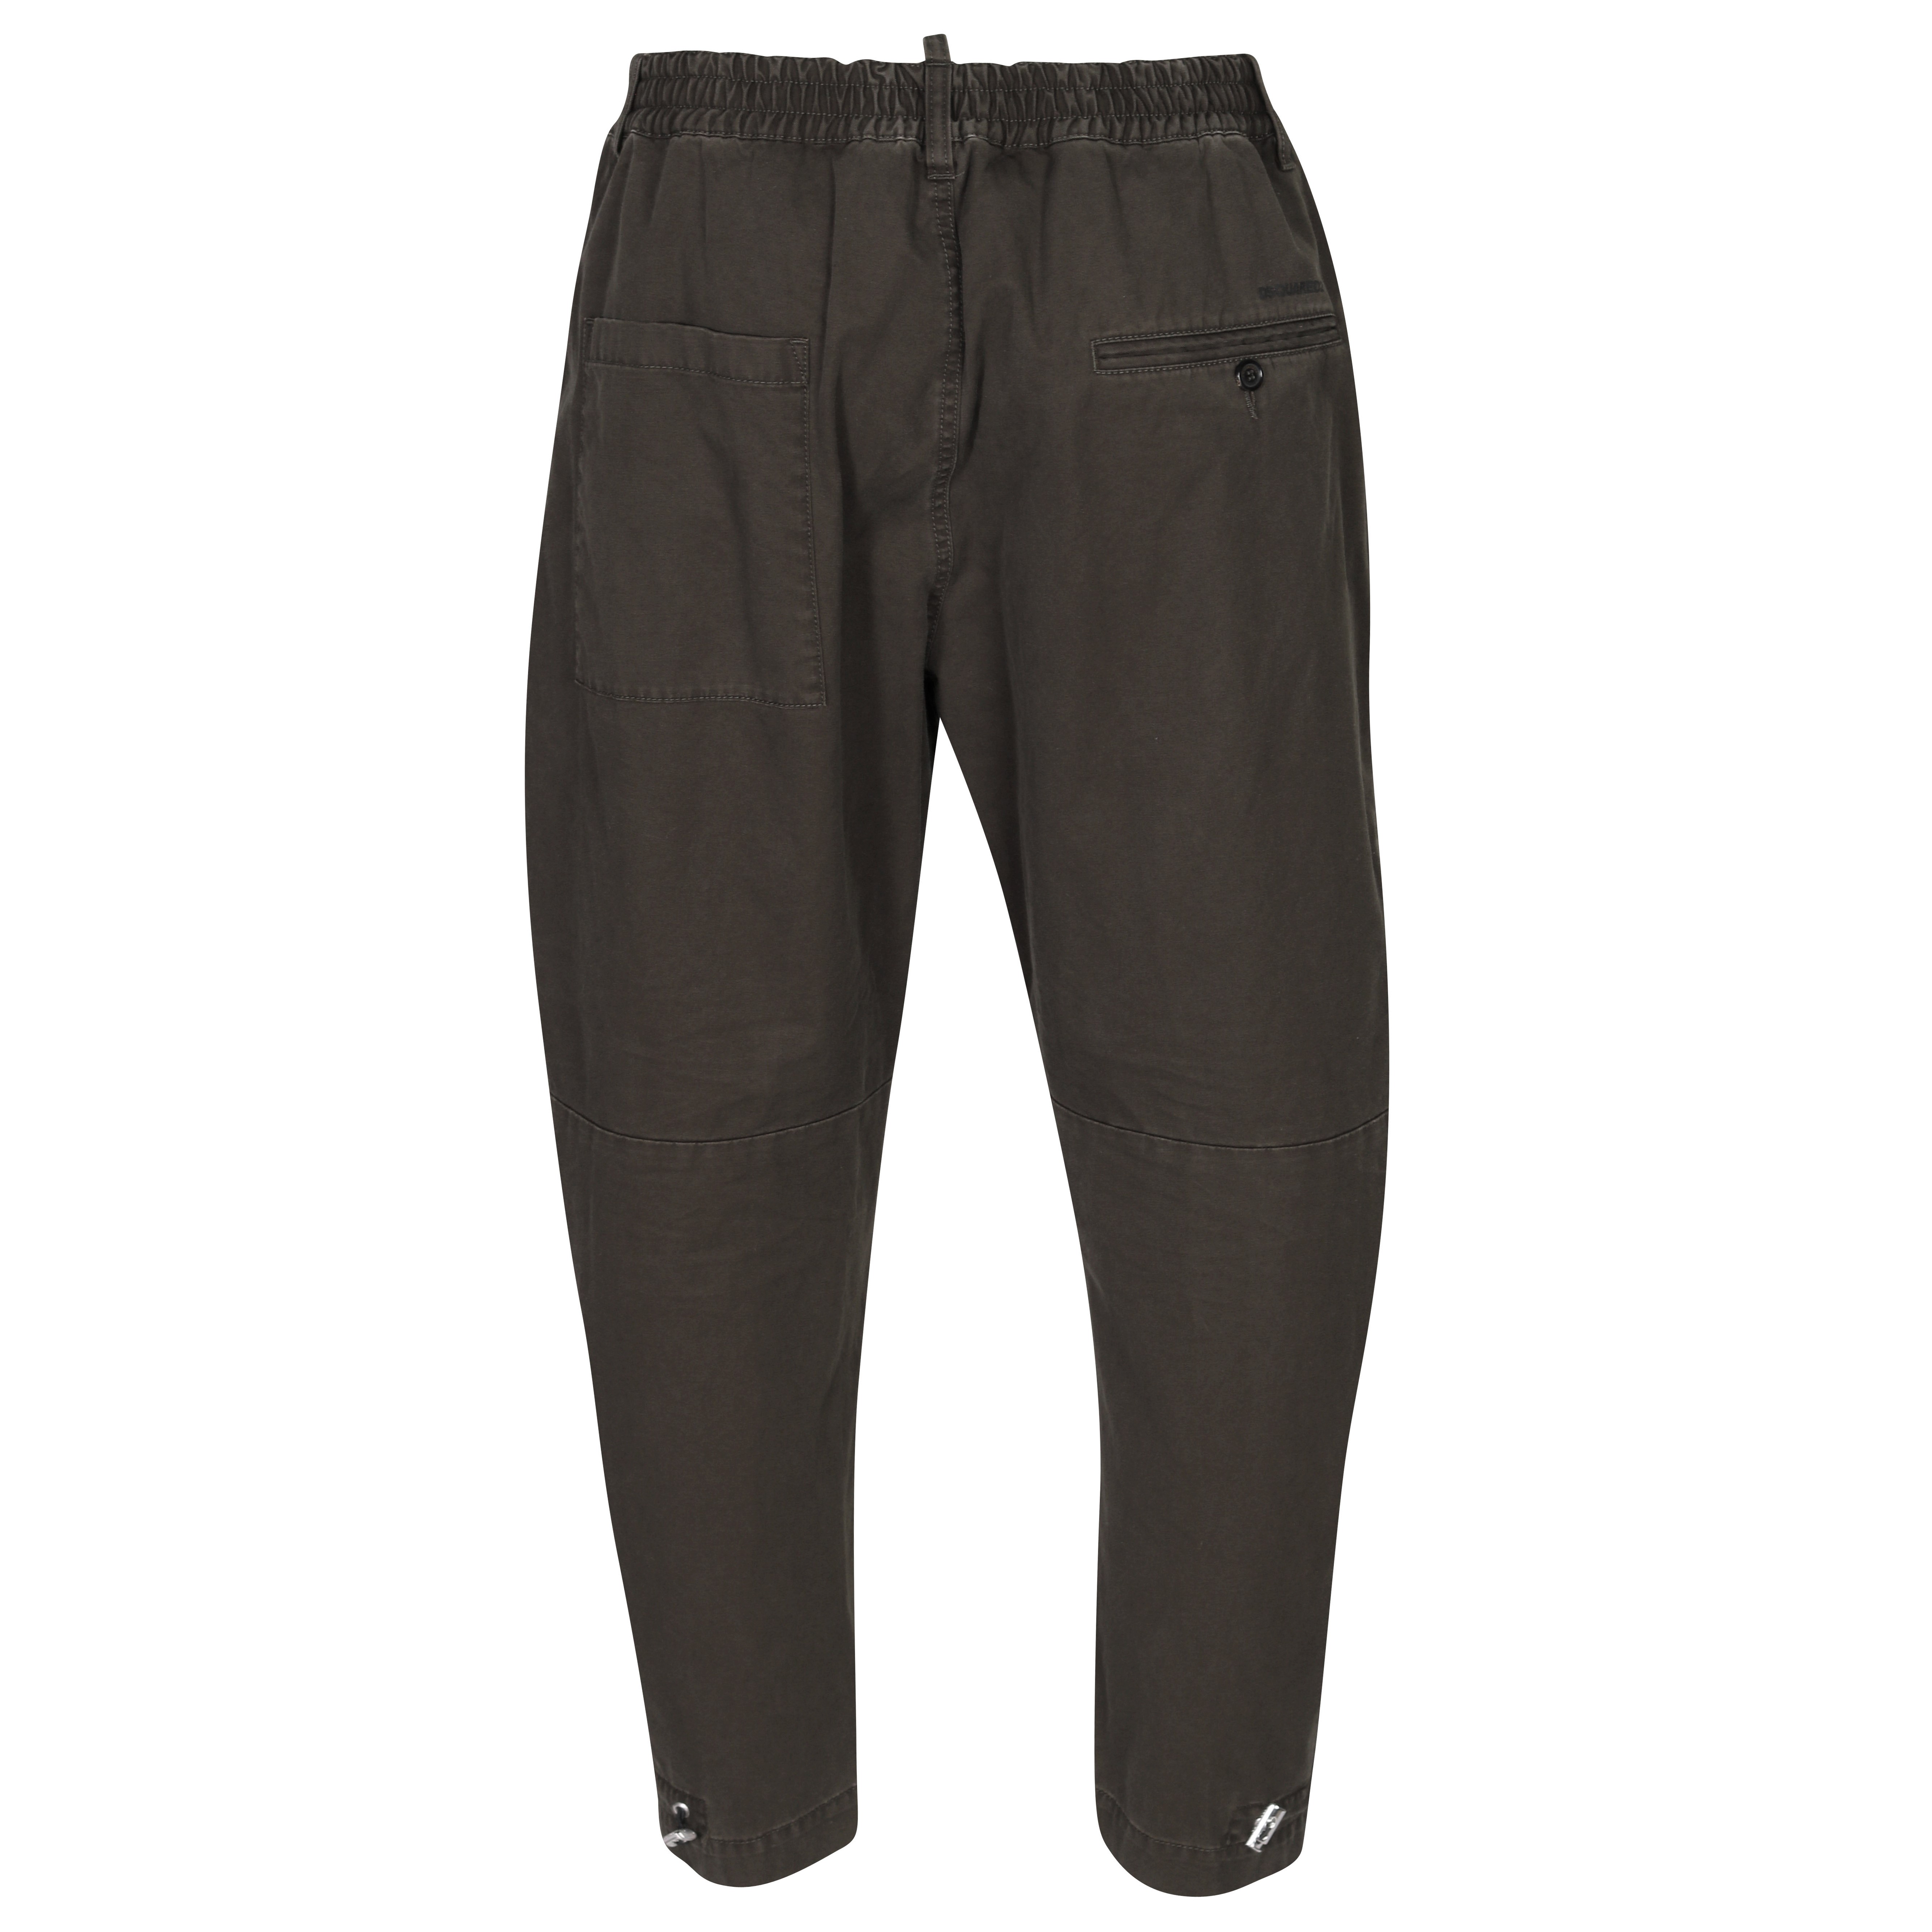 Dsquared Pully Pant in Dark Olive 52